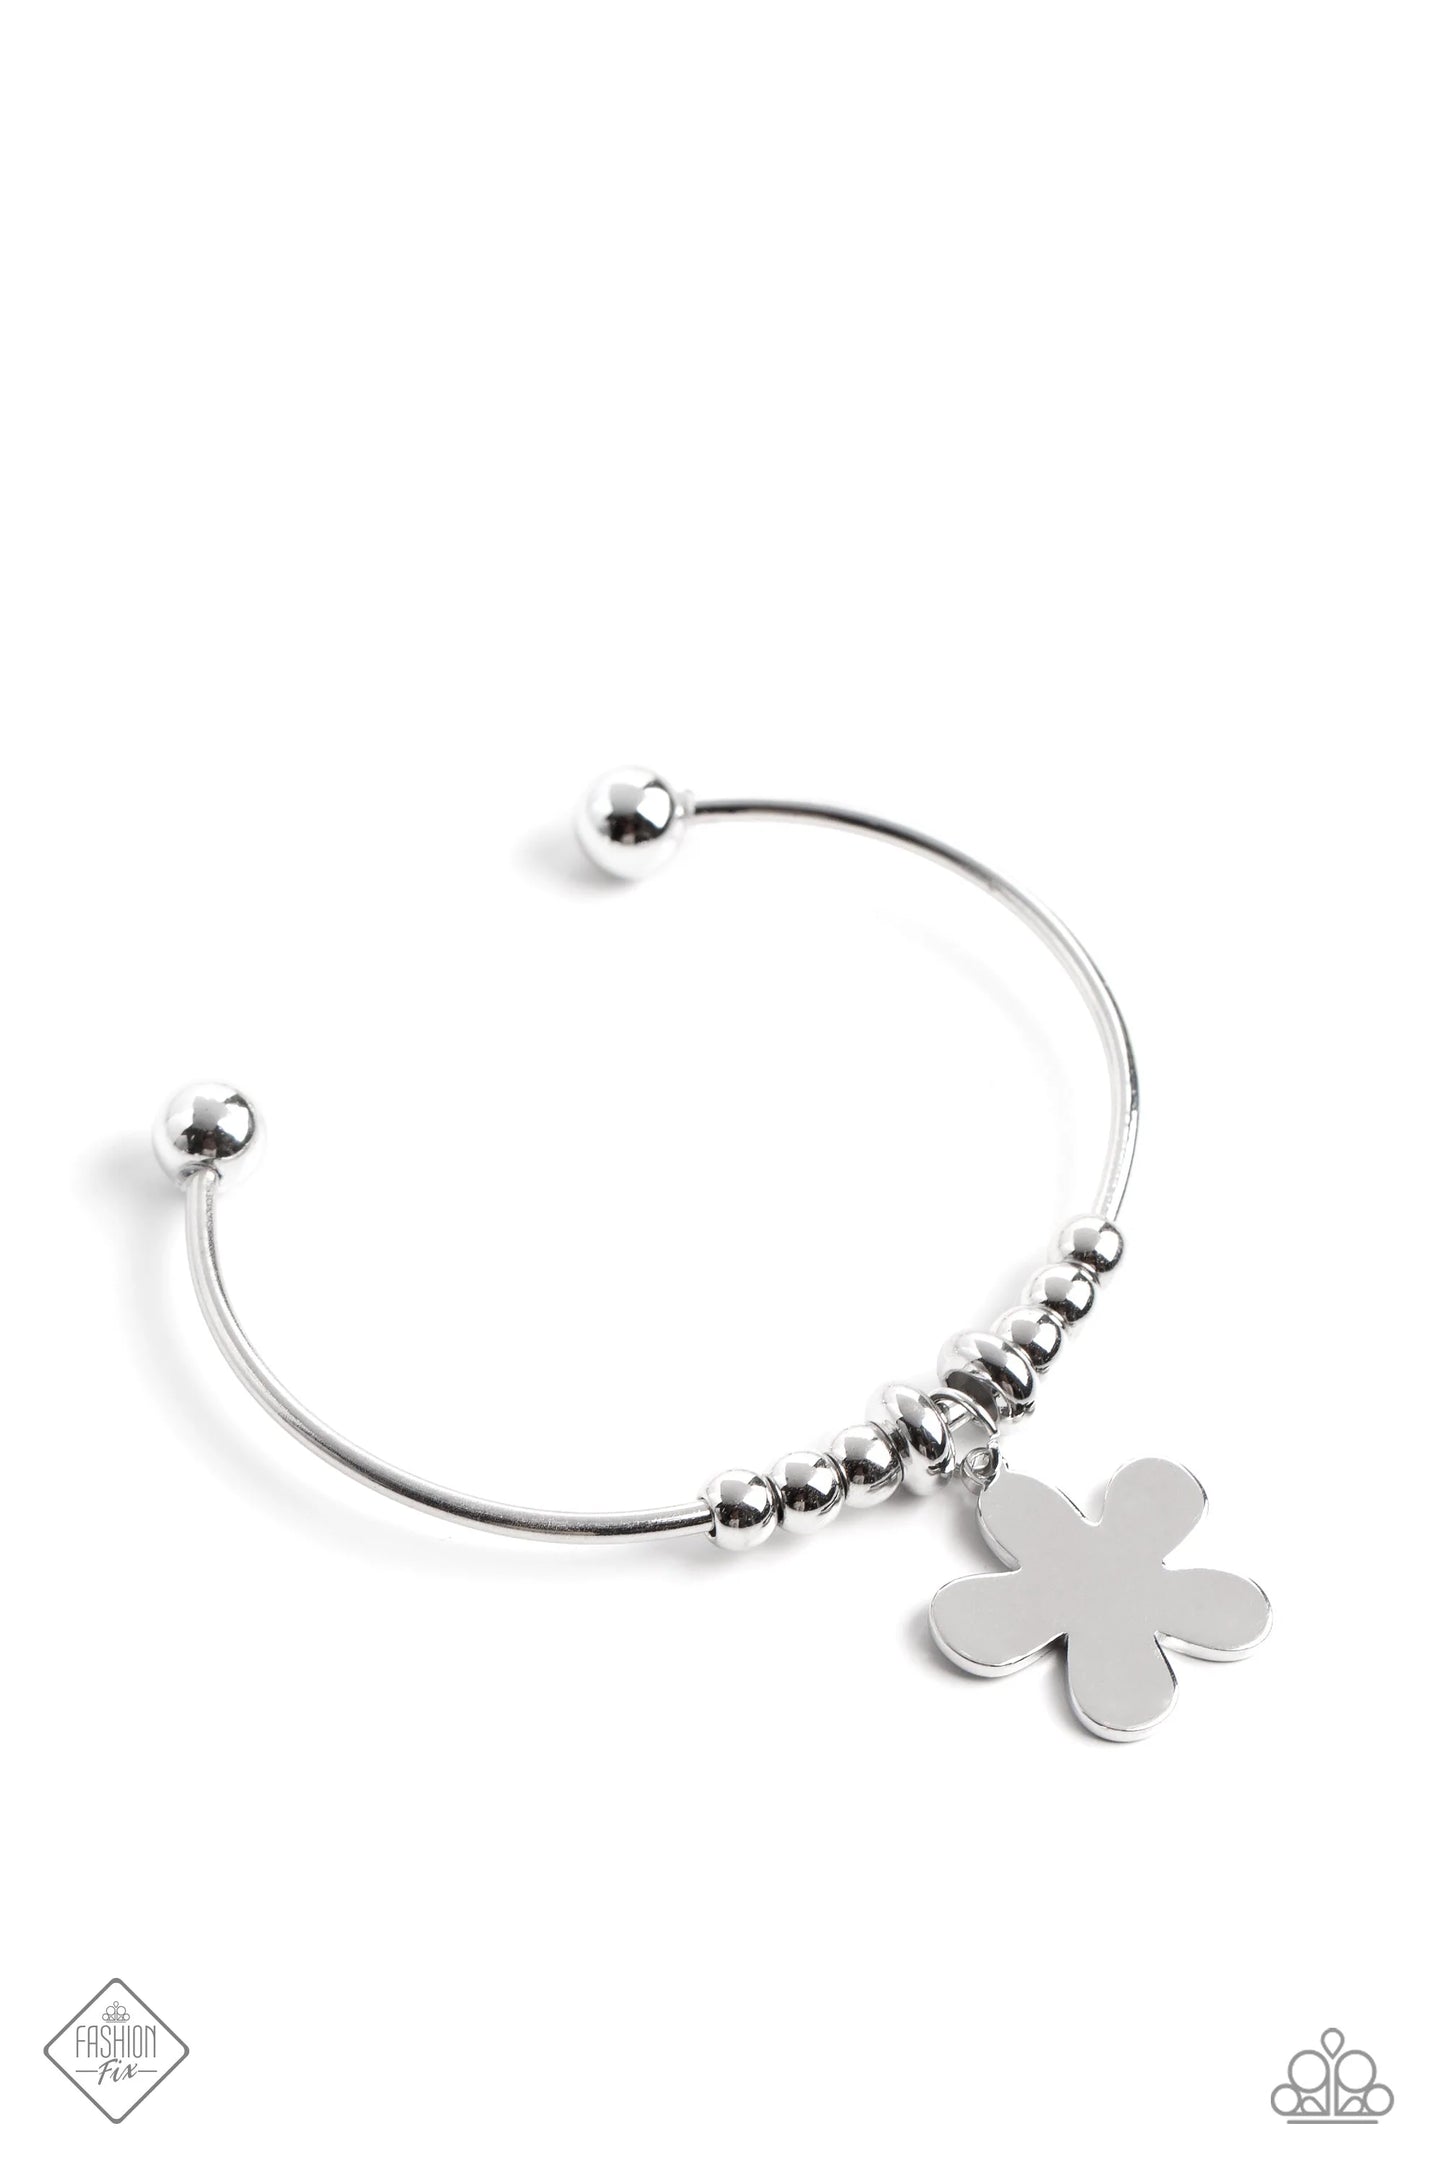 Comber Canvas - Silver Flower Cuff Bracelet - Paparazzi Accessories - A skinny silver bar is capped in barbell fittings, allowing a collection of sleek silver beads and a psychedelic flower in a high-sheen finish to slide along its surface as it arcs across the wrist. Sold as one individual bracelet.